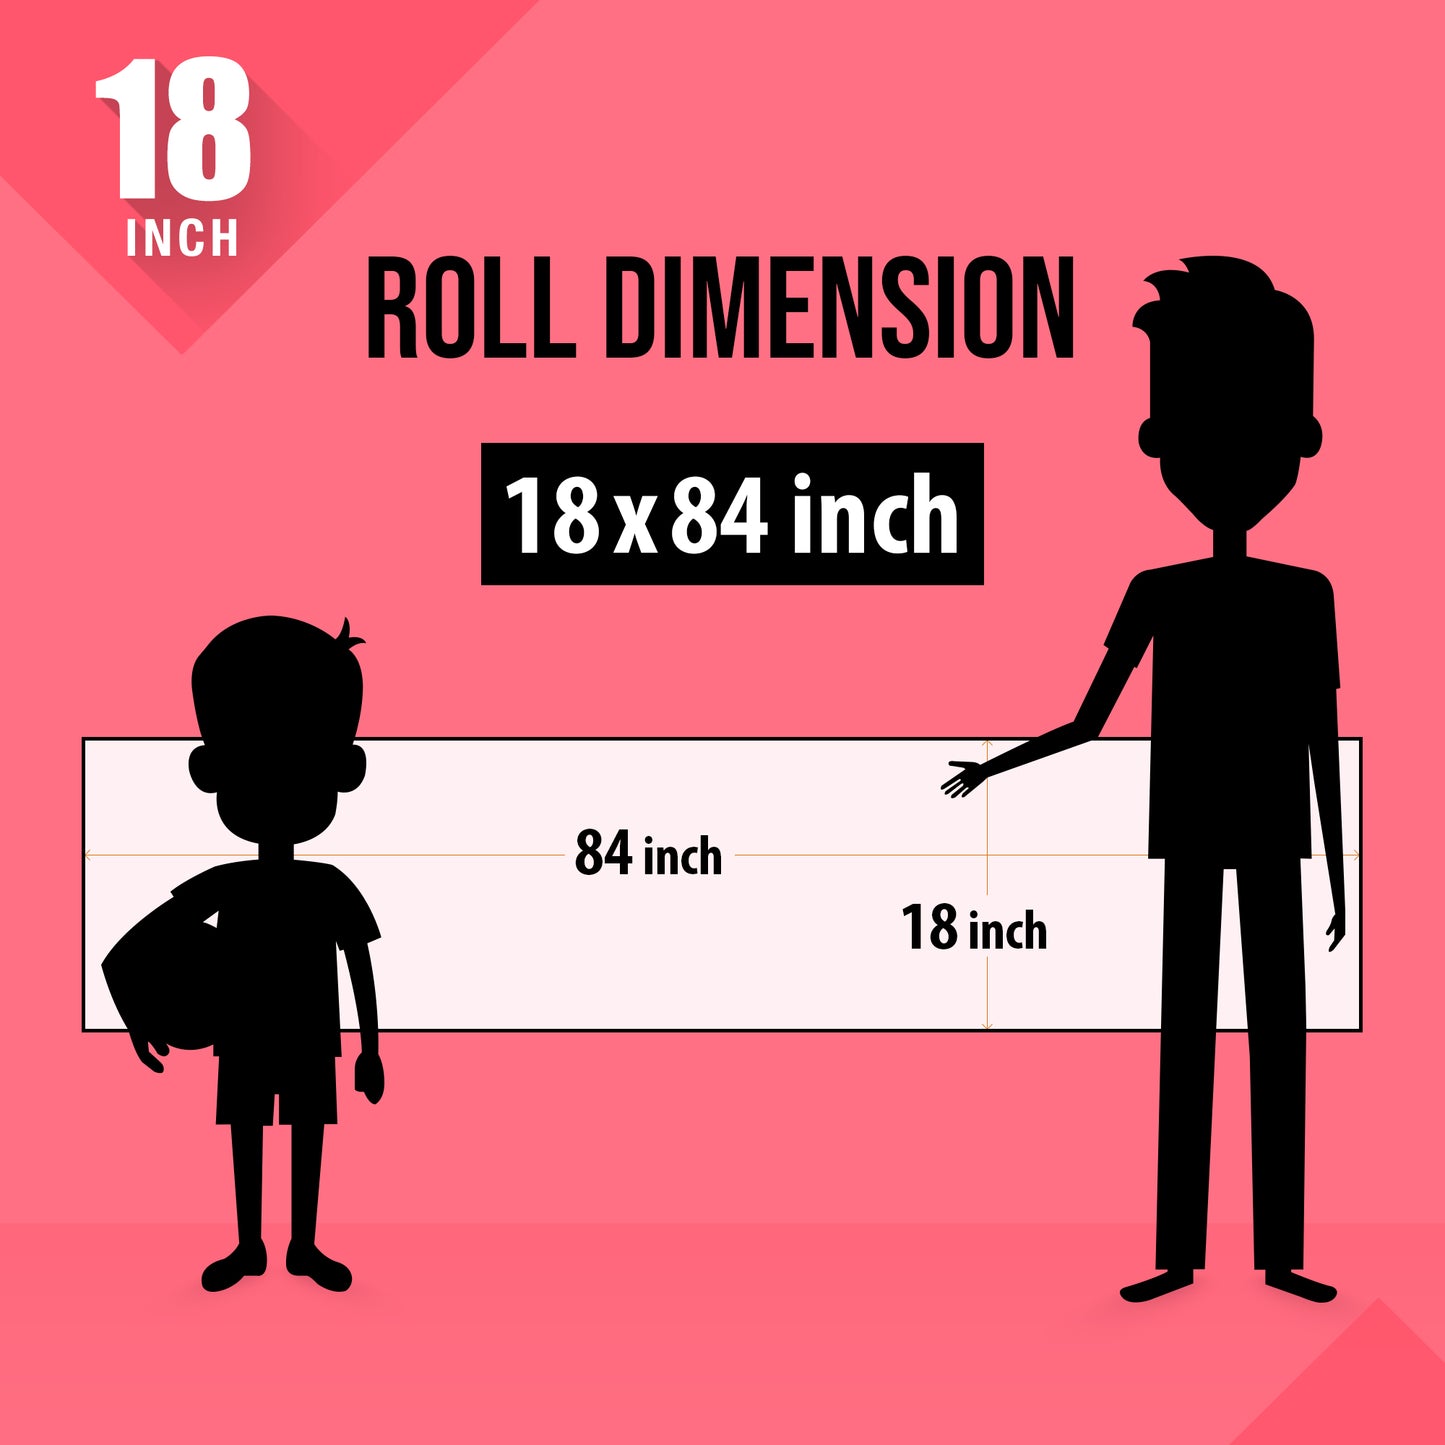 The image shows a pink background with a ruler indicating child and adult height on an 18*84 inch paper roll dimension.